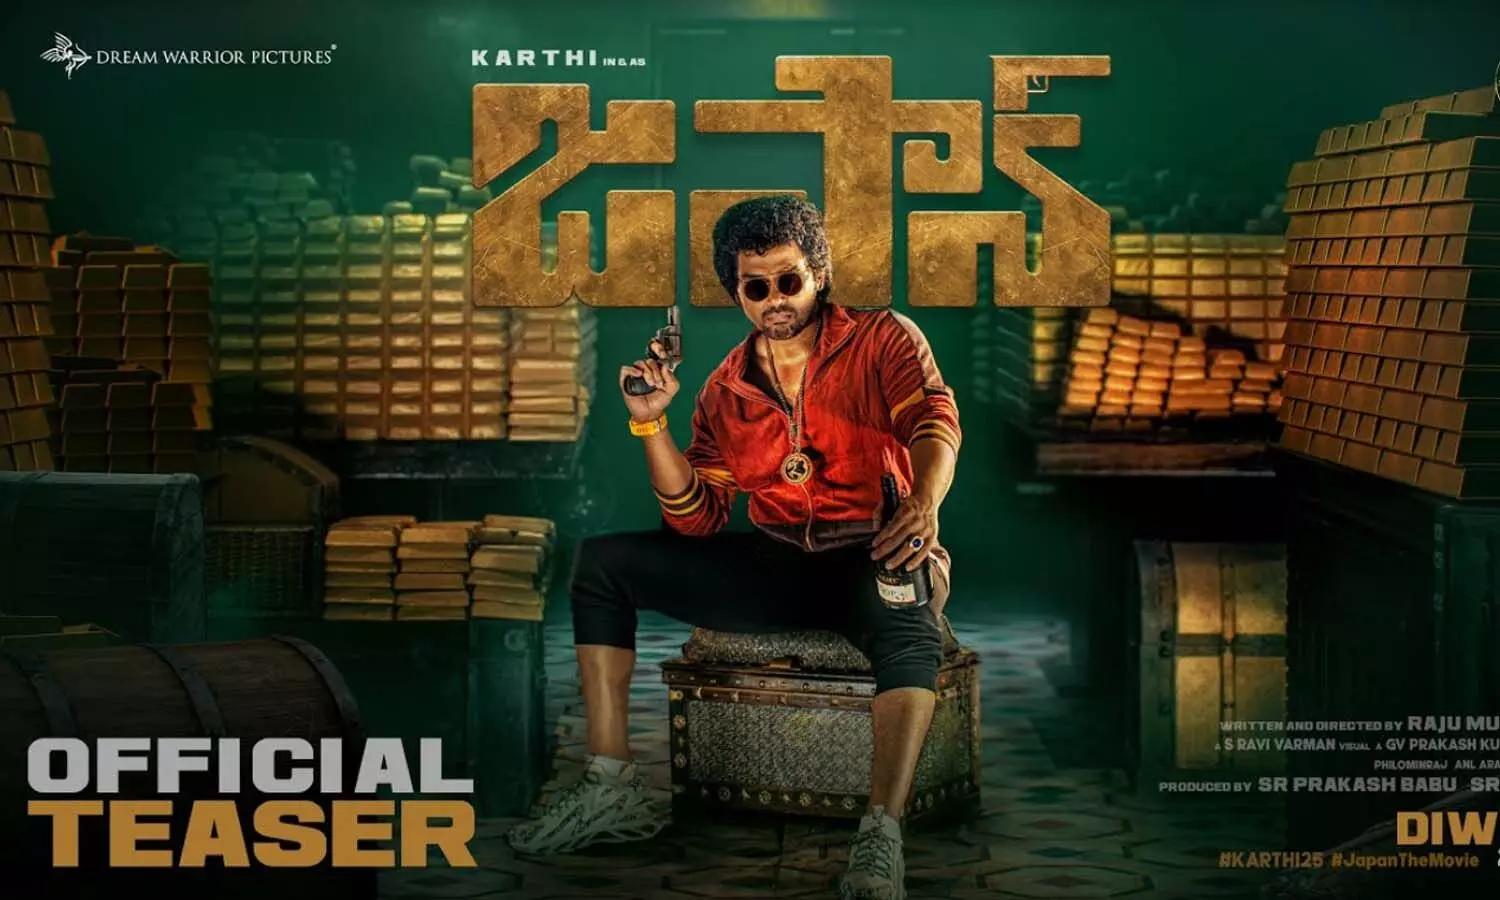 Japan Movie Teaser: Karthi portrays the role of a thief in his milestone 25th film